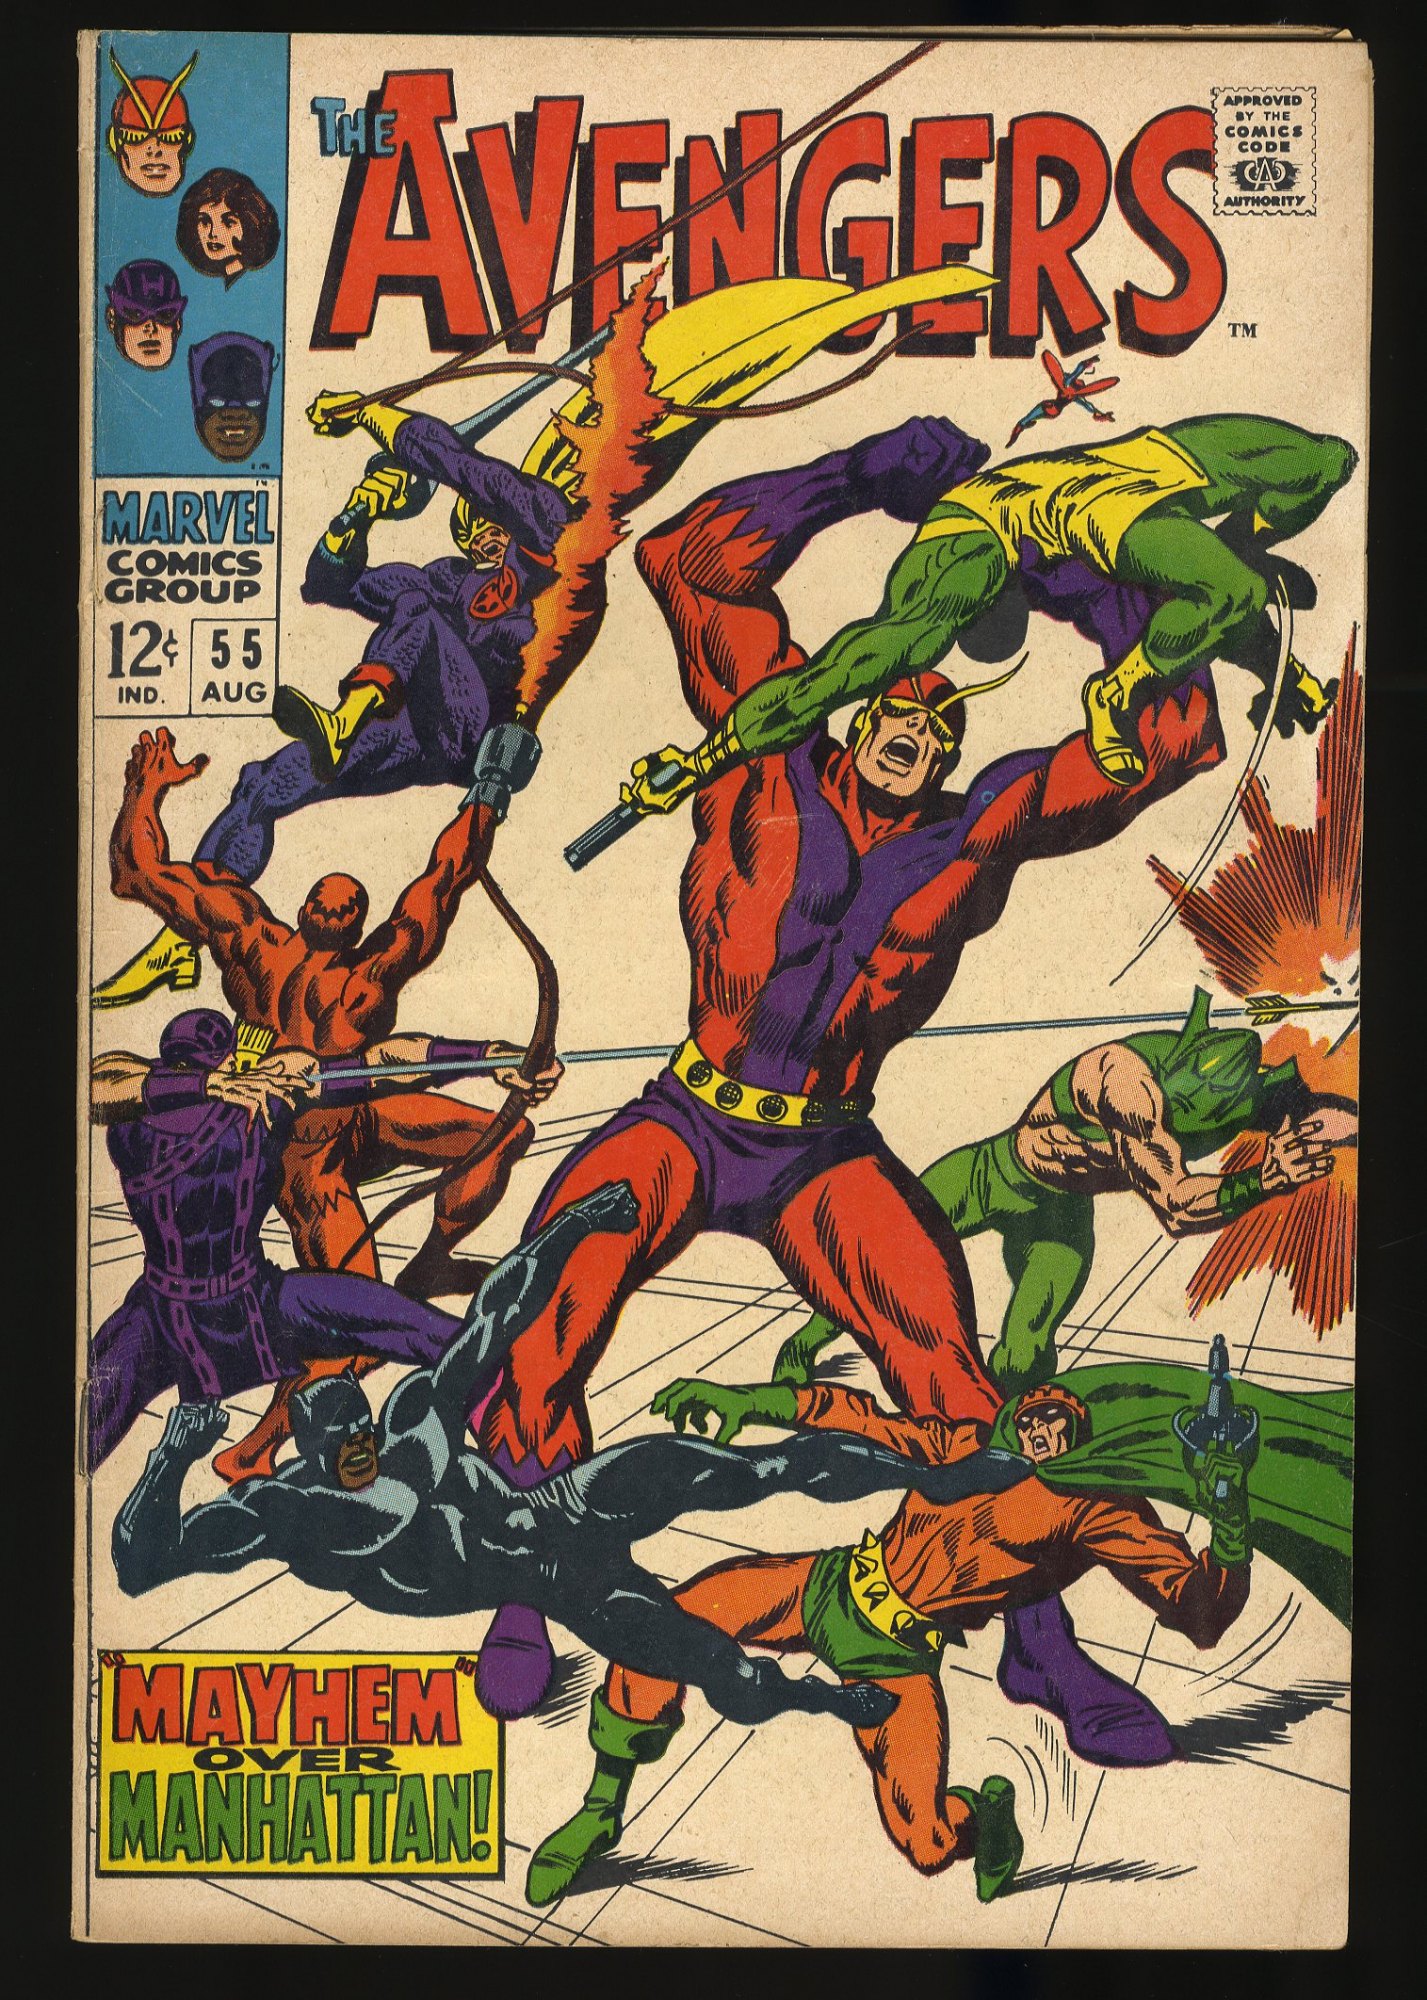 Image: Avengers #55 FN- 5.5 1st Appearance of Ultron! Black Knight!